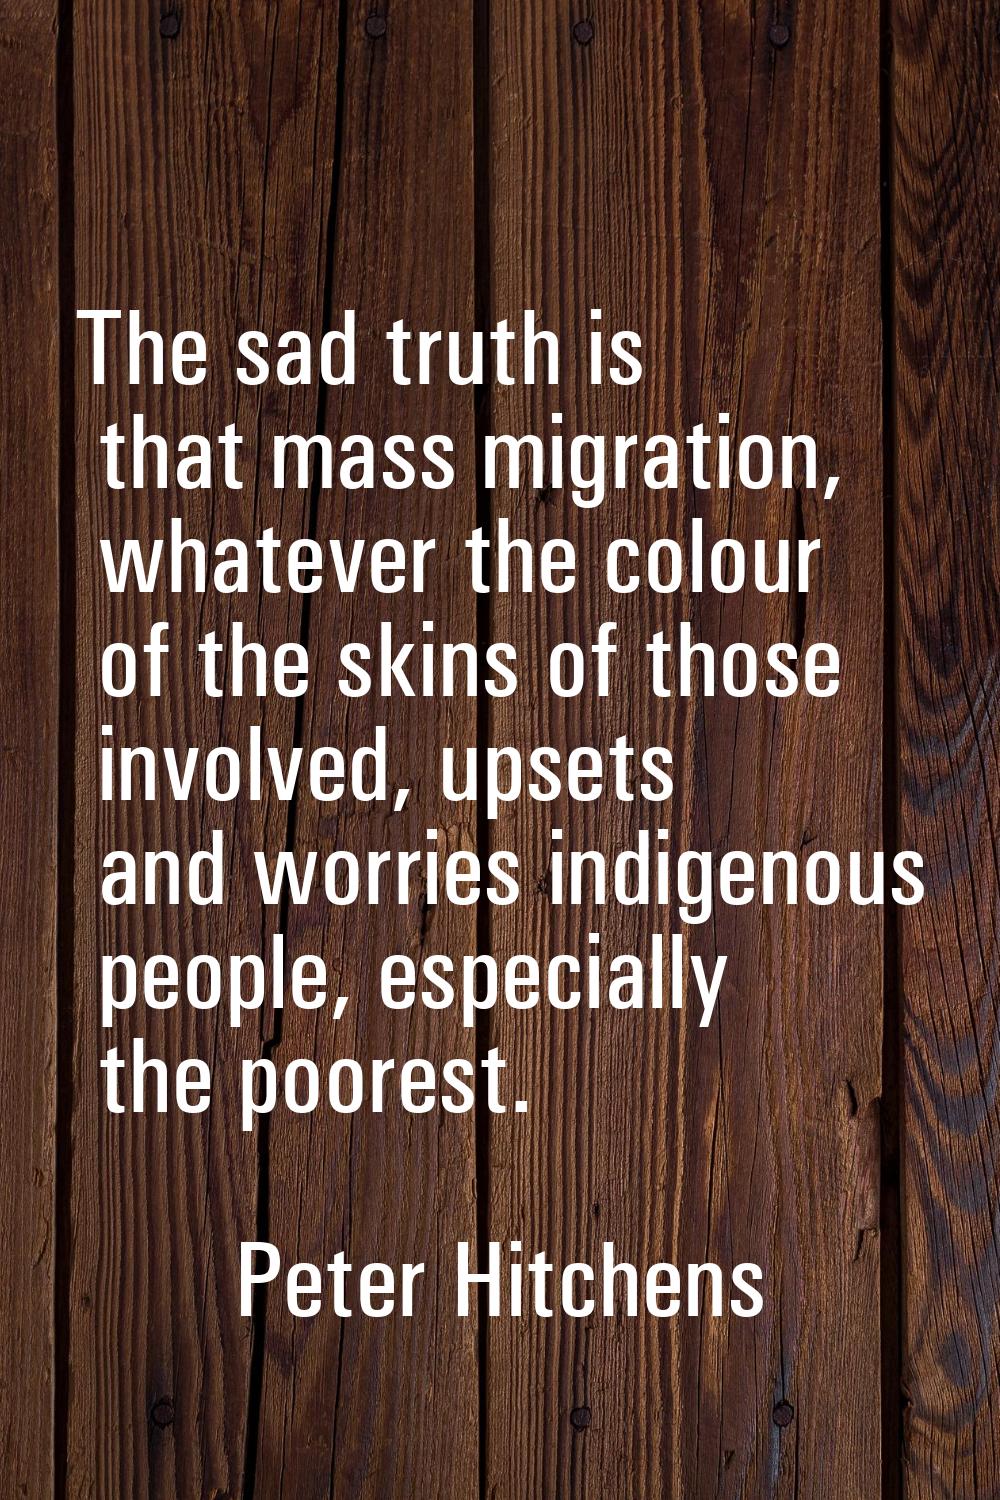 The sad truth is that mass migration, whatever the colour of the skins of those involved, upsets an